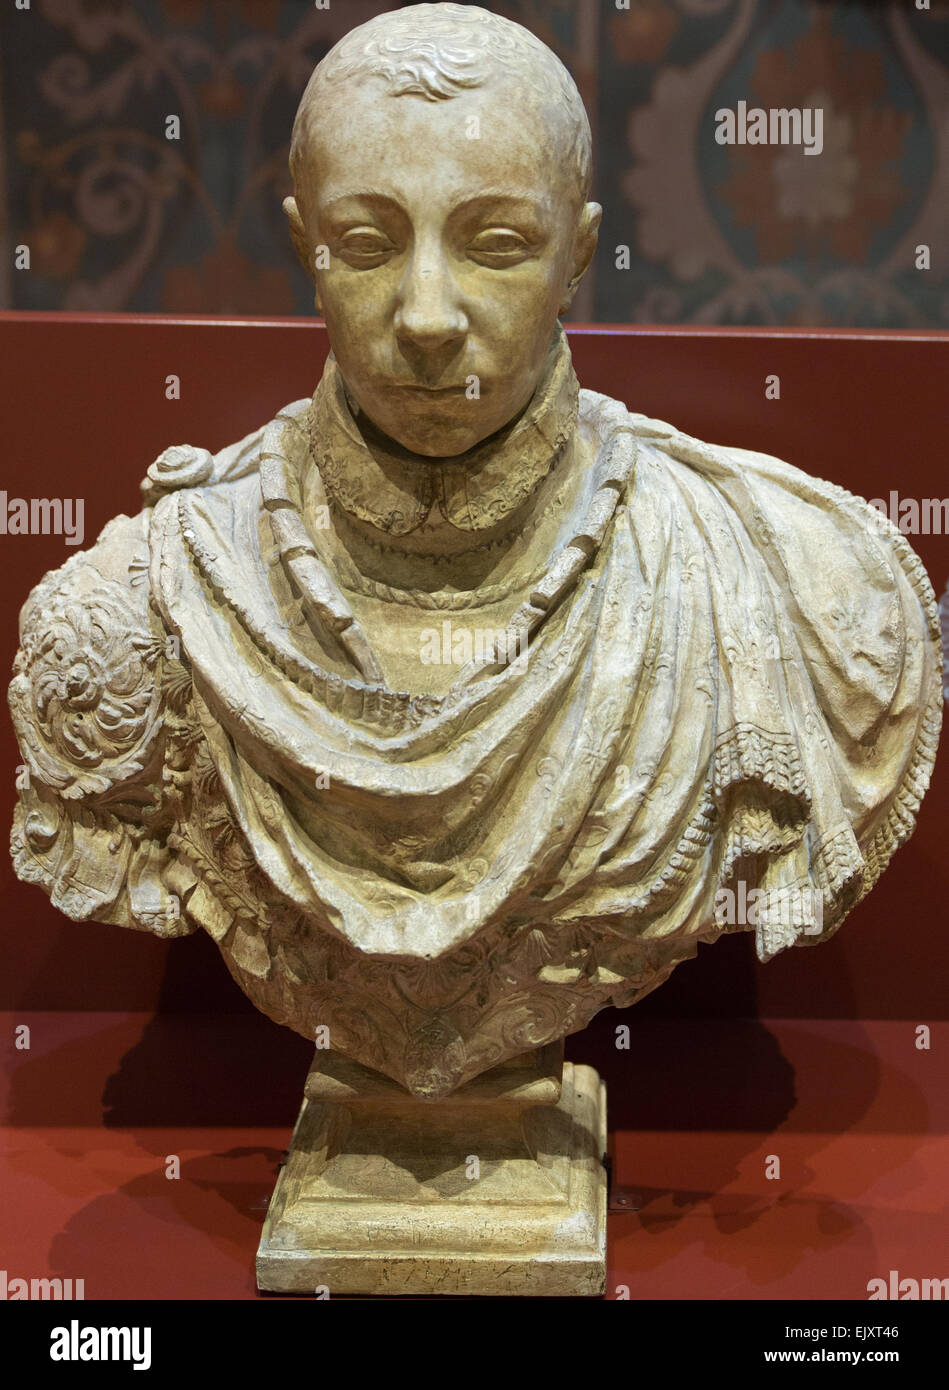 ActiveMuseum_0005751.jpg / Charles IX King of France in 1560, according to the bust of Germain Pilon kept at the Louvre 05/12/2013  -   / 16th century Collection / Active Museum Stock Photo